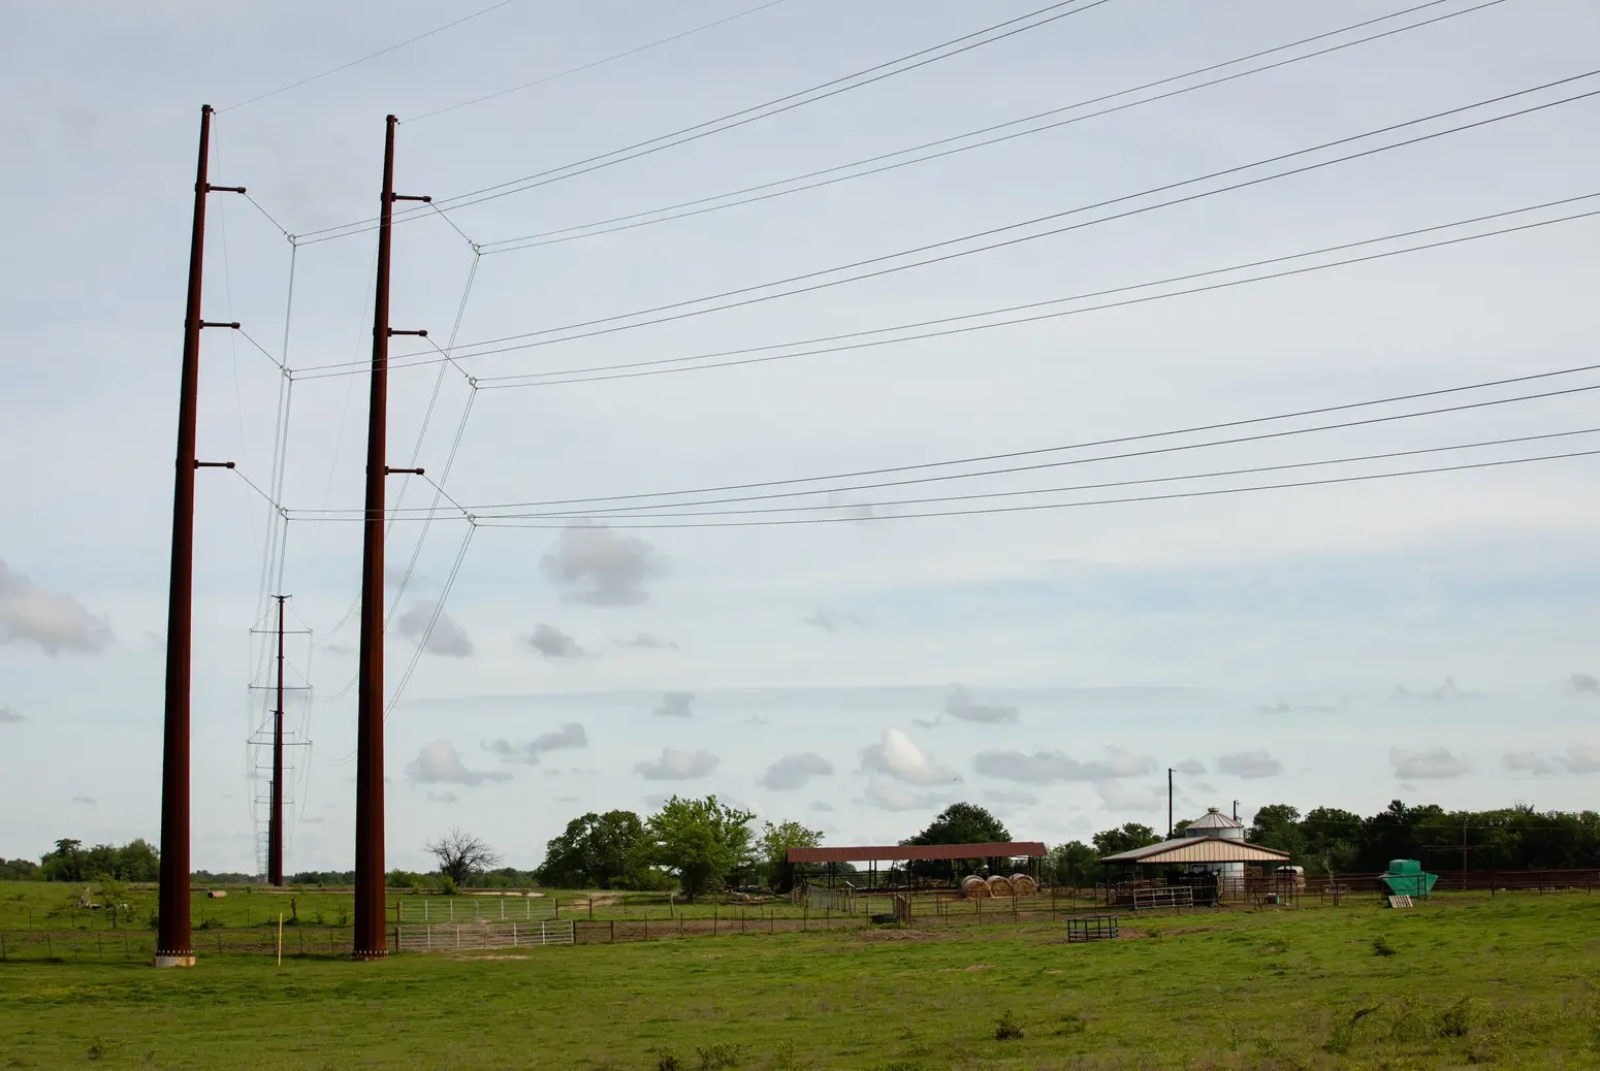 A field with electrical lines running across it.